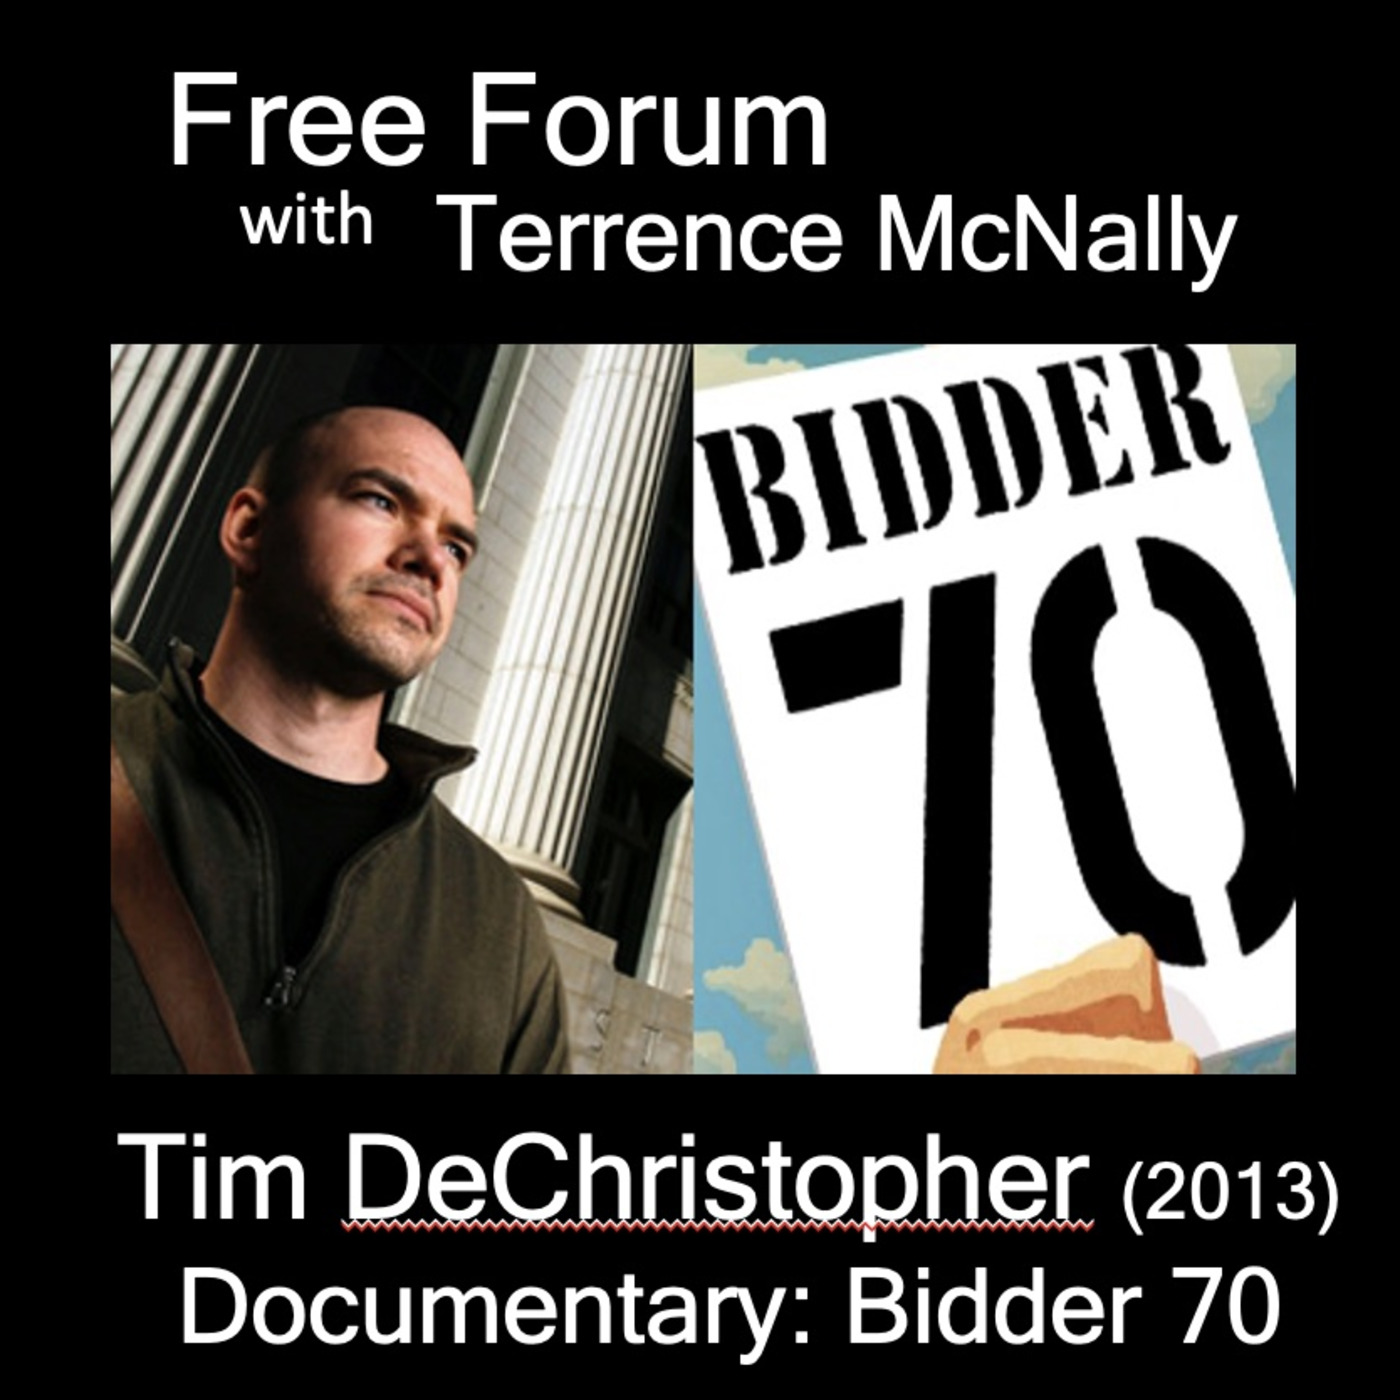 Episode 634: TIM DeCHRISTOPHER-Courage & Conviction-Tim served 21 months in prison for civil disobedience protecting public lands